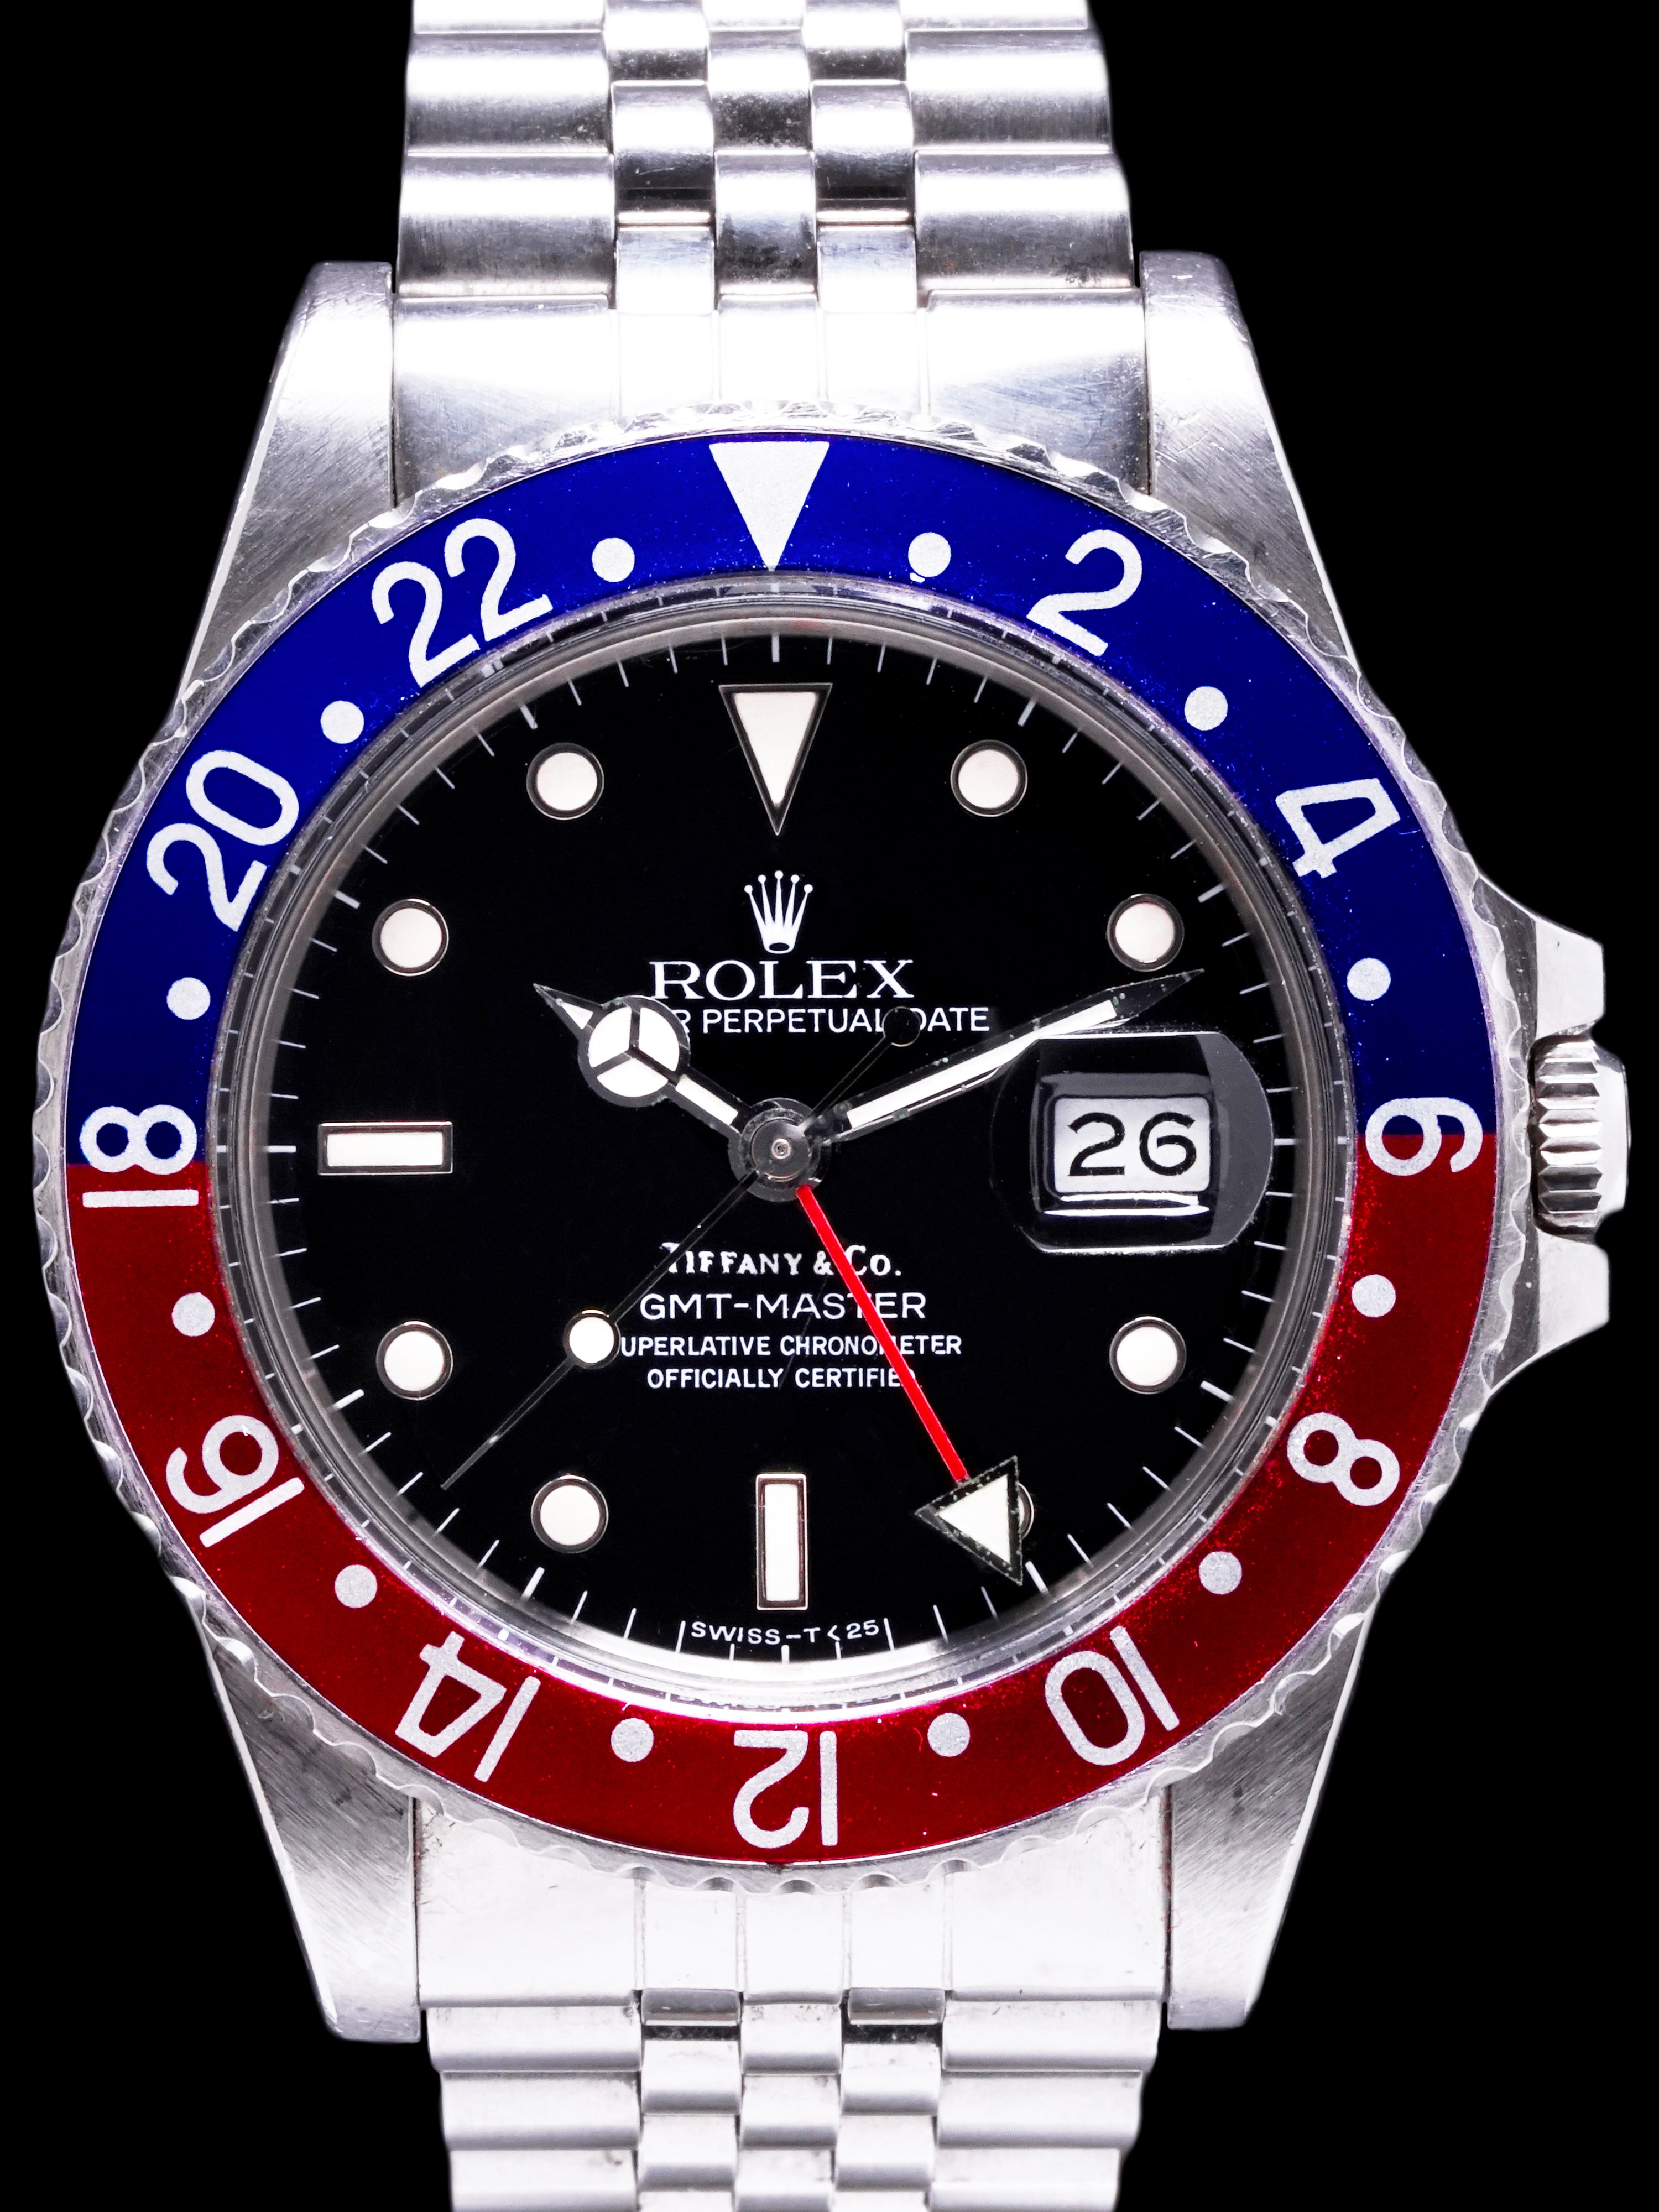 *Unpolished* 1985 Rolex GMT-Master (Ref. 16750) Tiffany & Co. "Spider Dial"